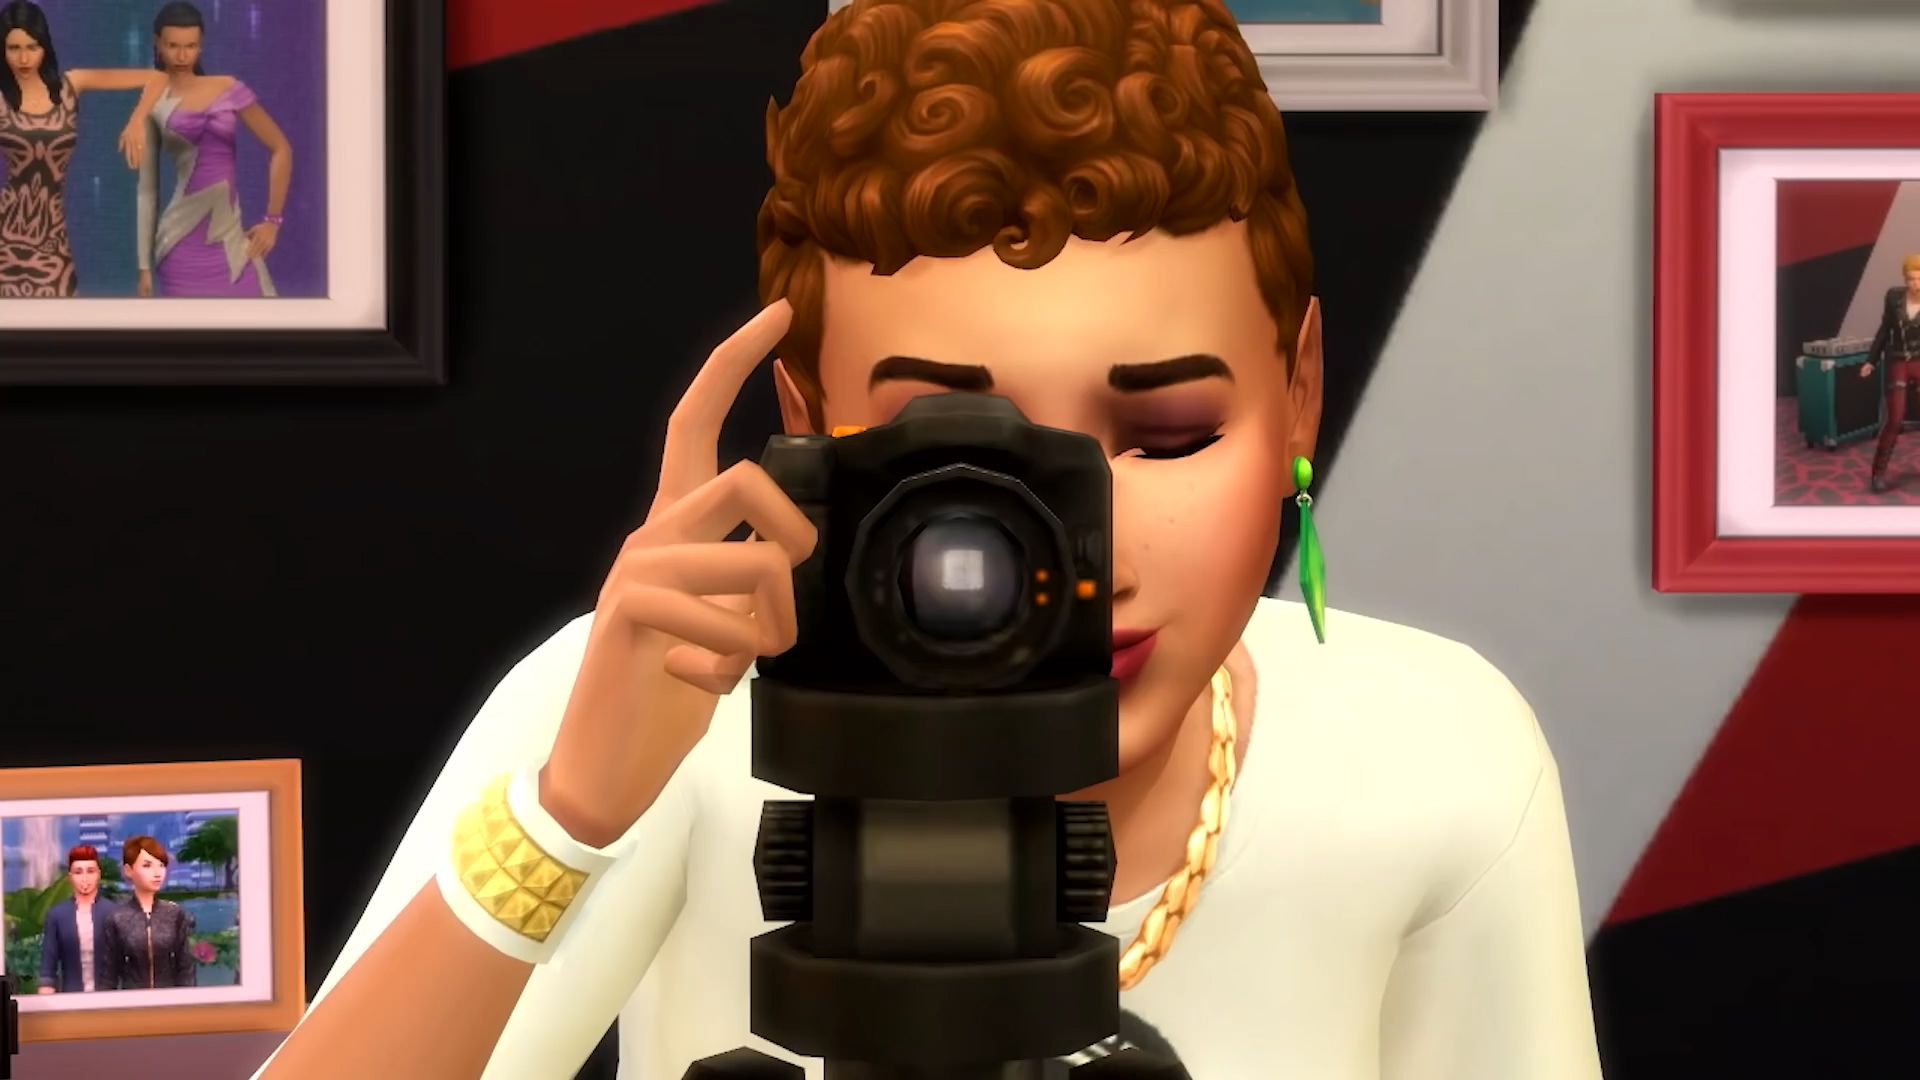 The Sims 4: Moschino Stuff, The Sims Wiki